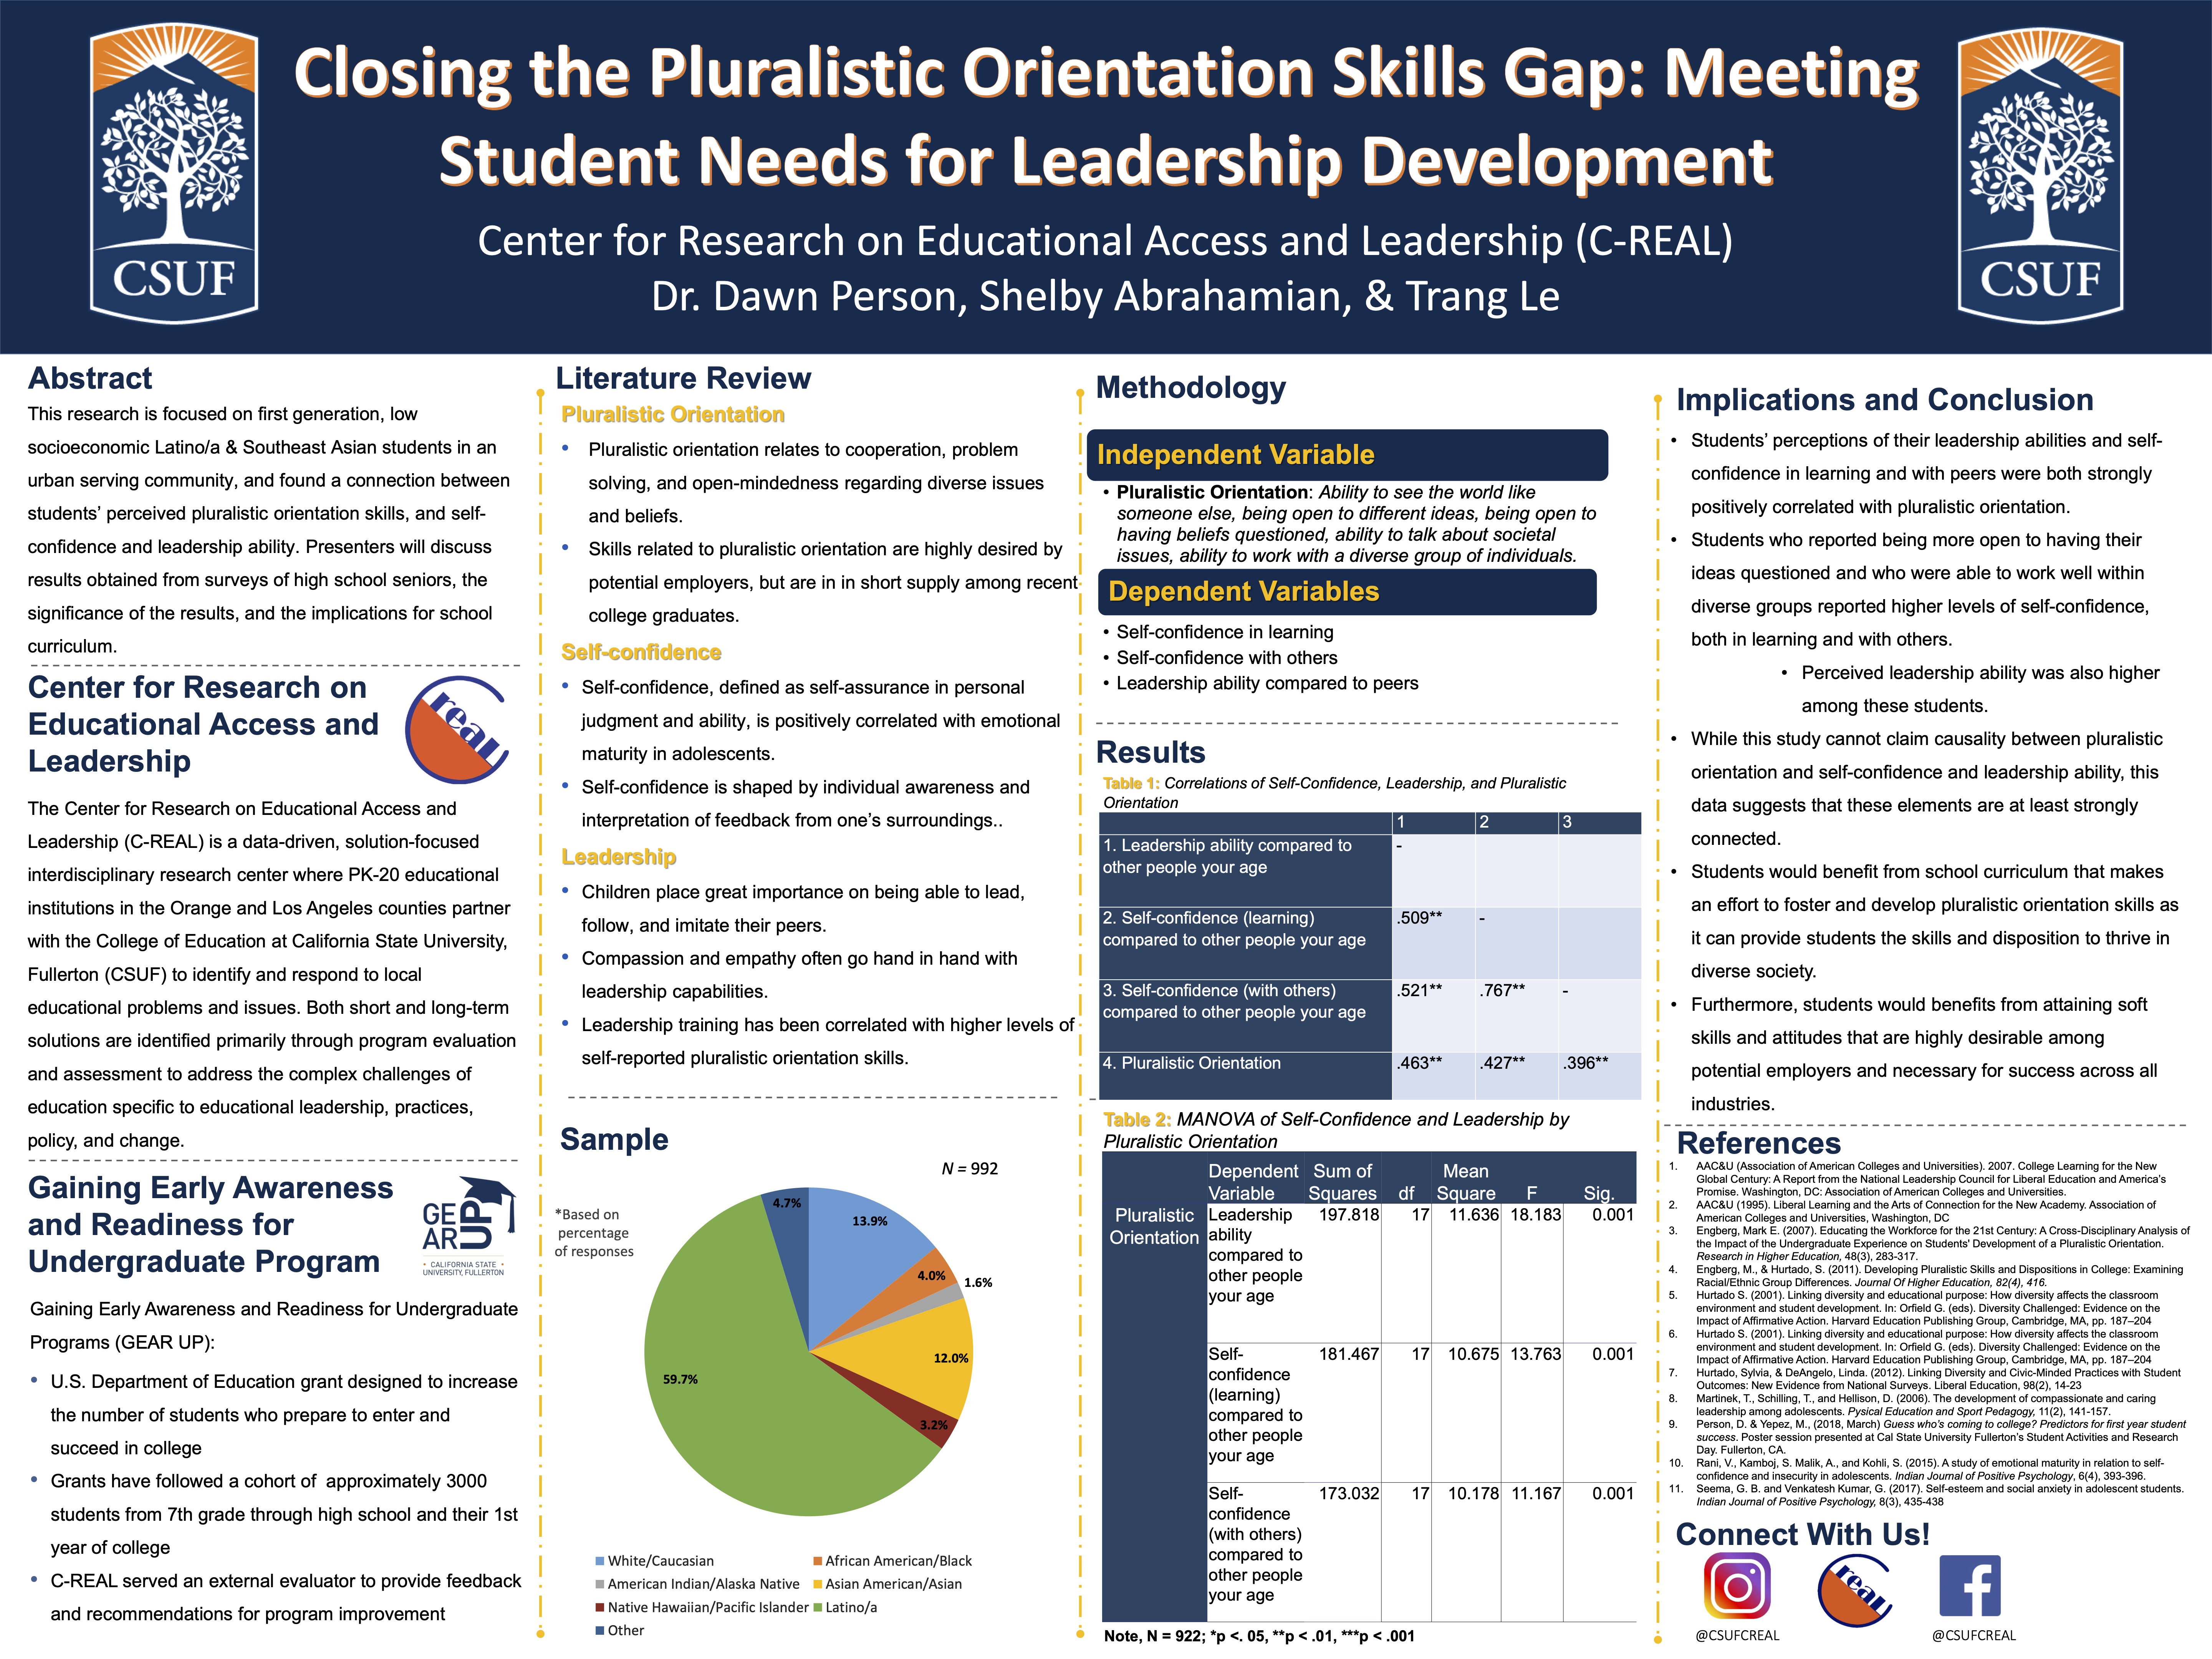 2019 Ed.D Symposium Submission: GEAR UP